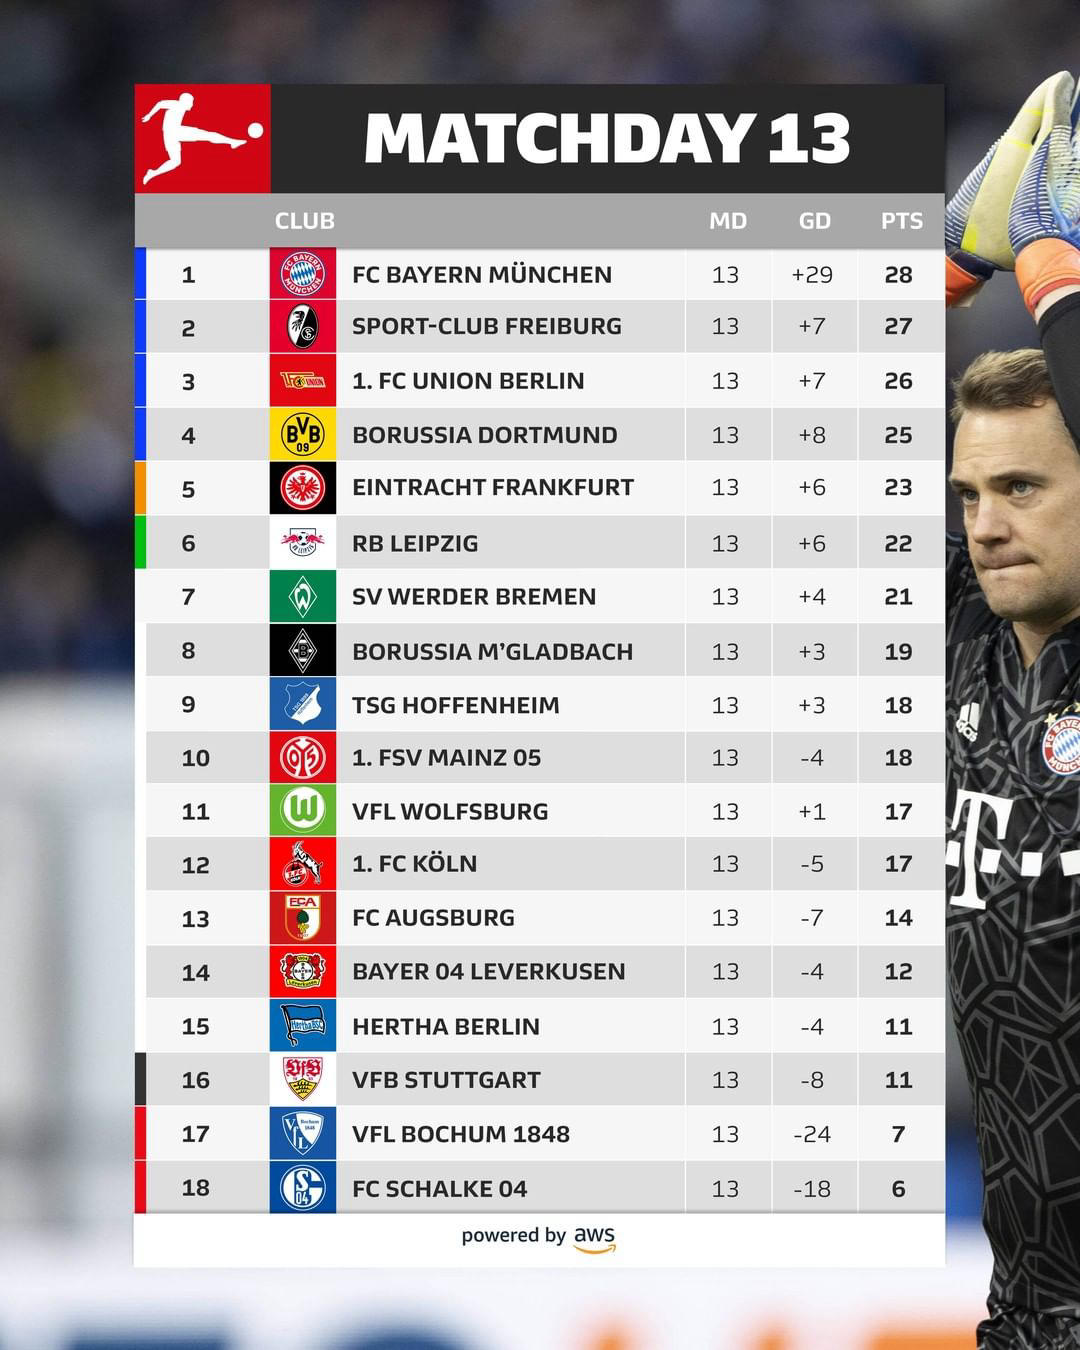 image  1 Bundesliga - It's #FCBayern who lead the way in the #Bundesliga after #MD13